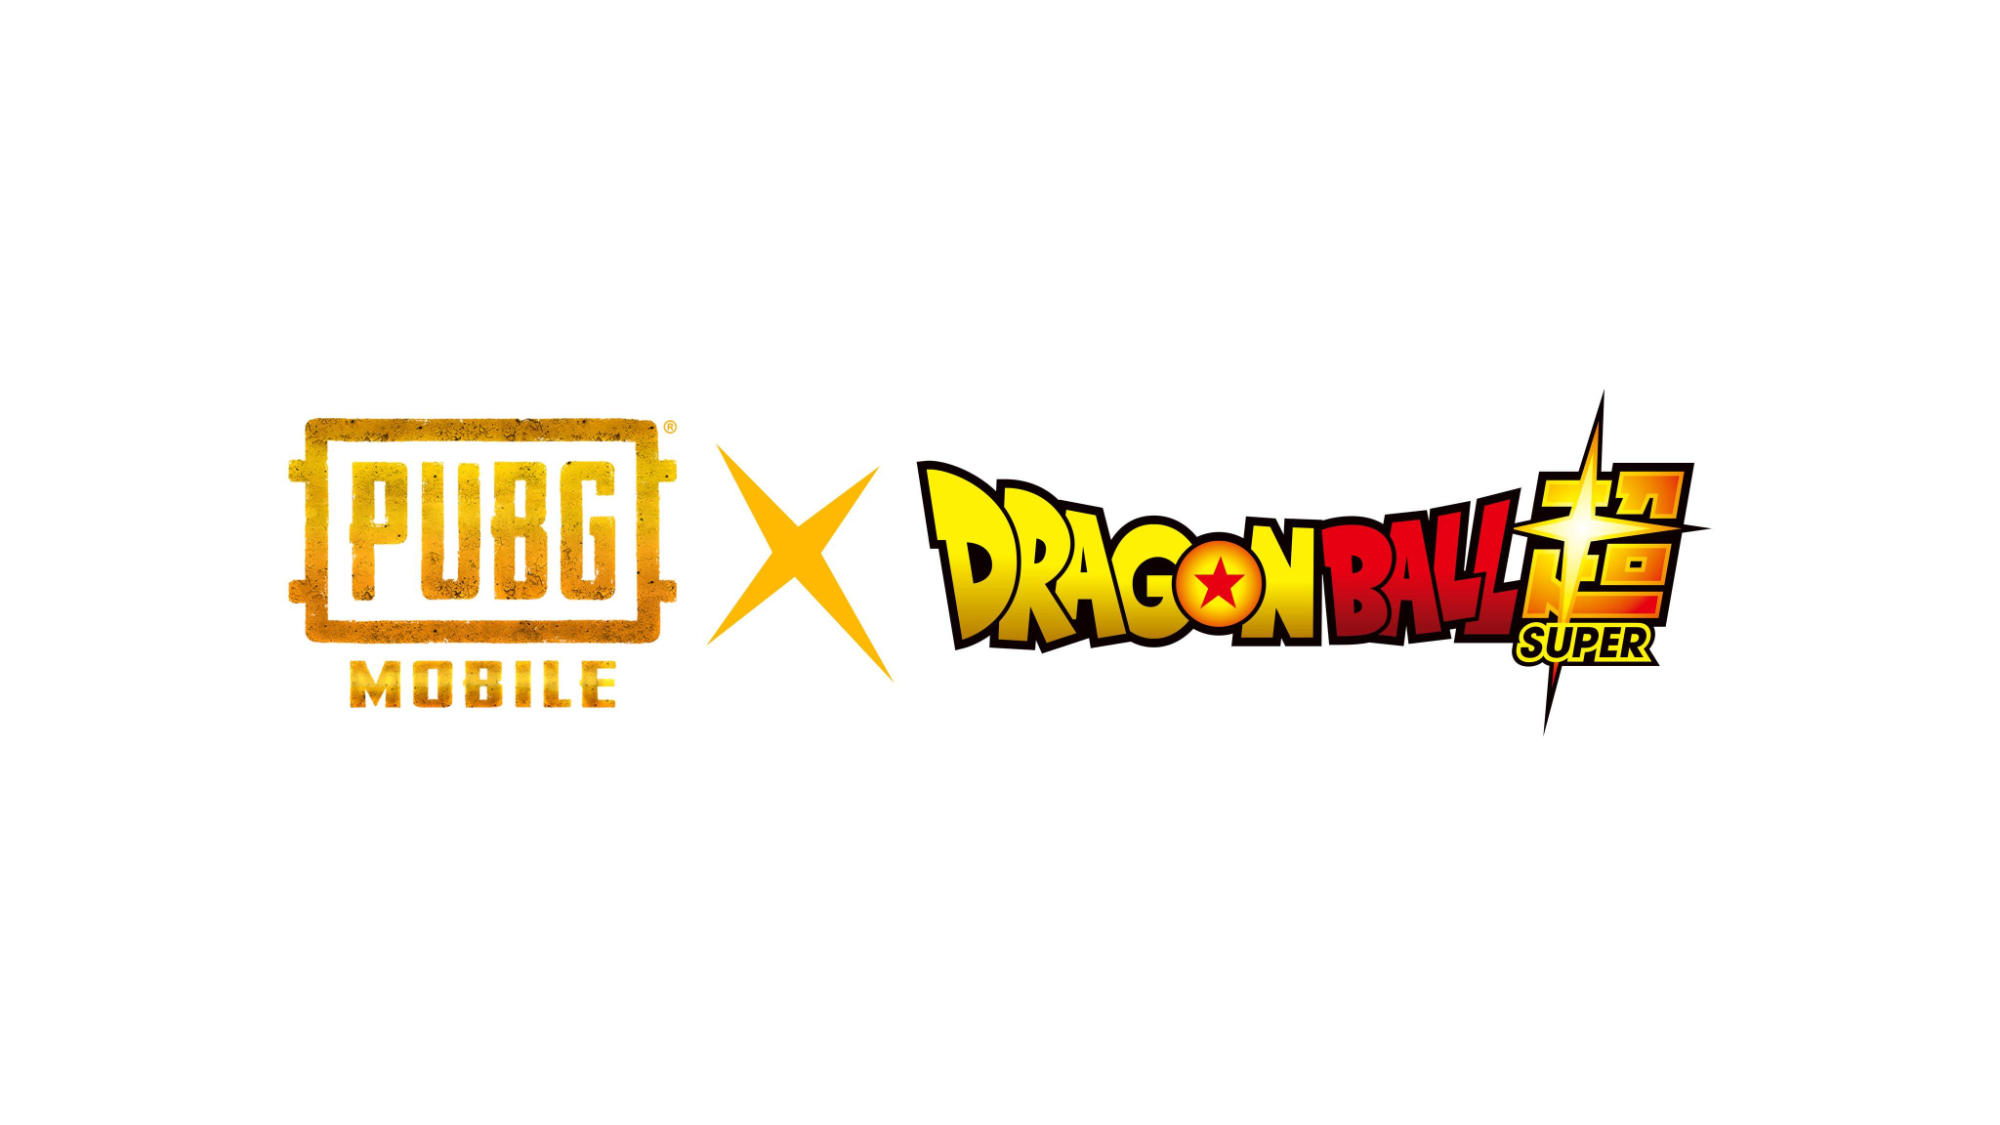 Fortnite Dragon Ball Collaboration Is Live, Gameplay Trailer Revealed